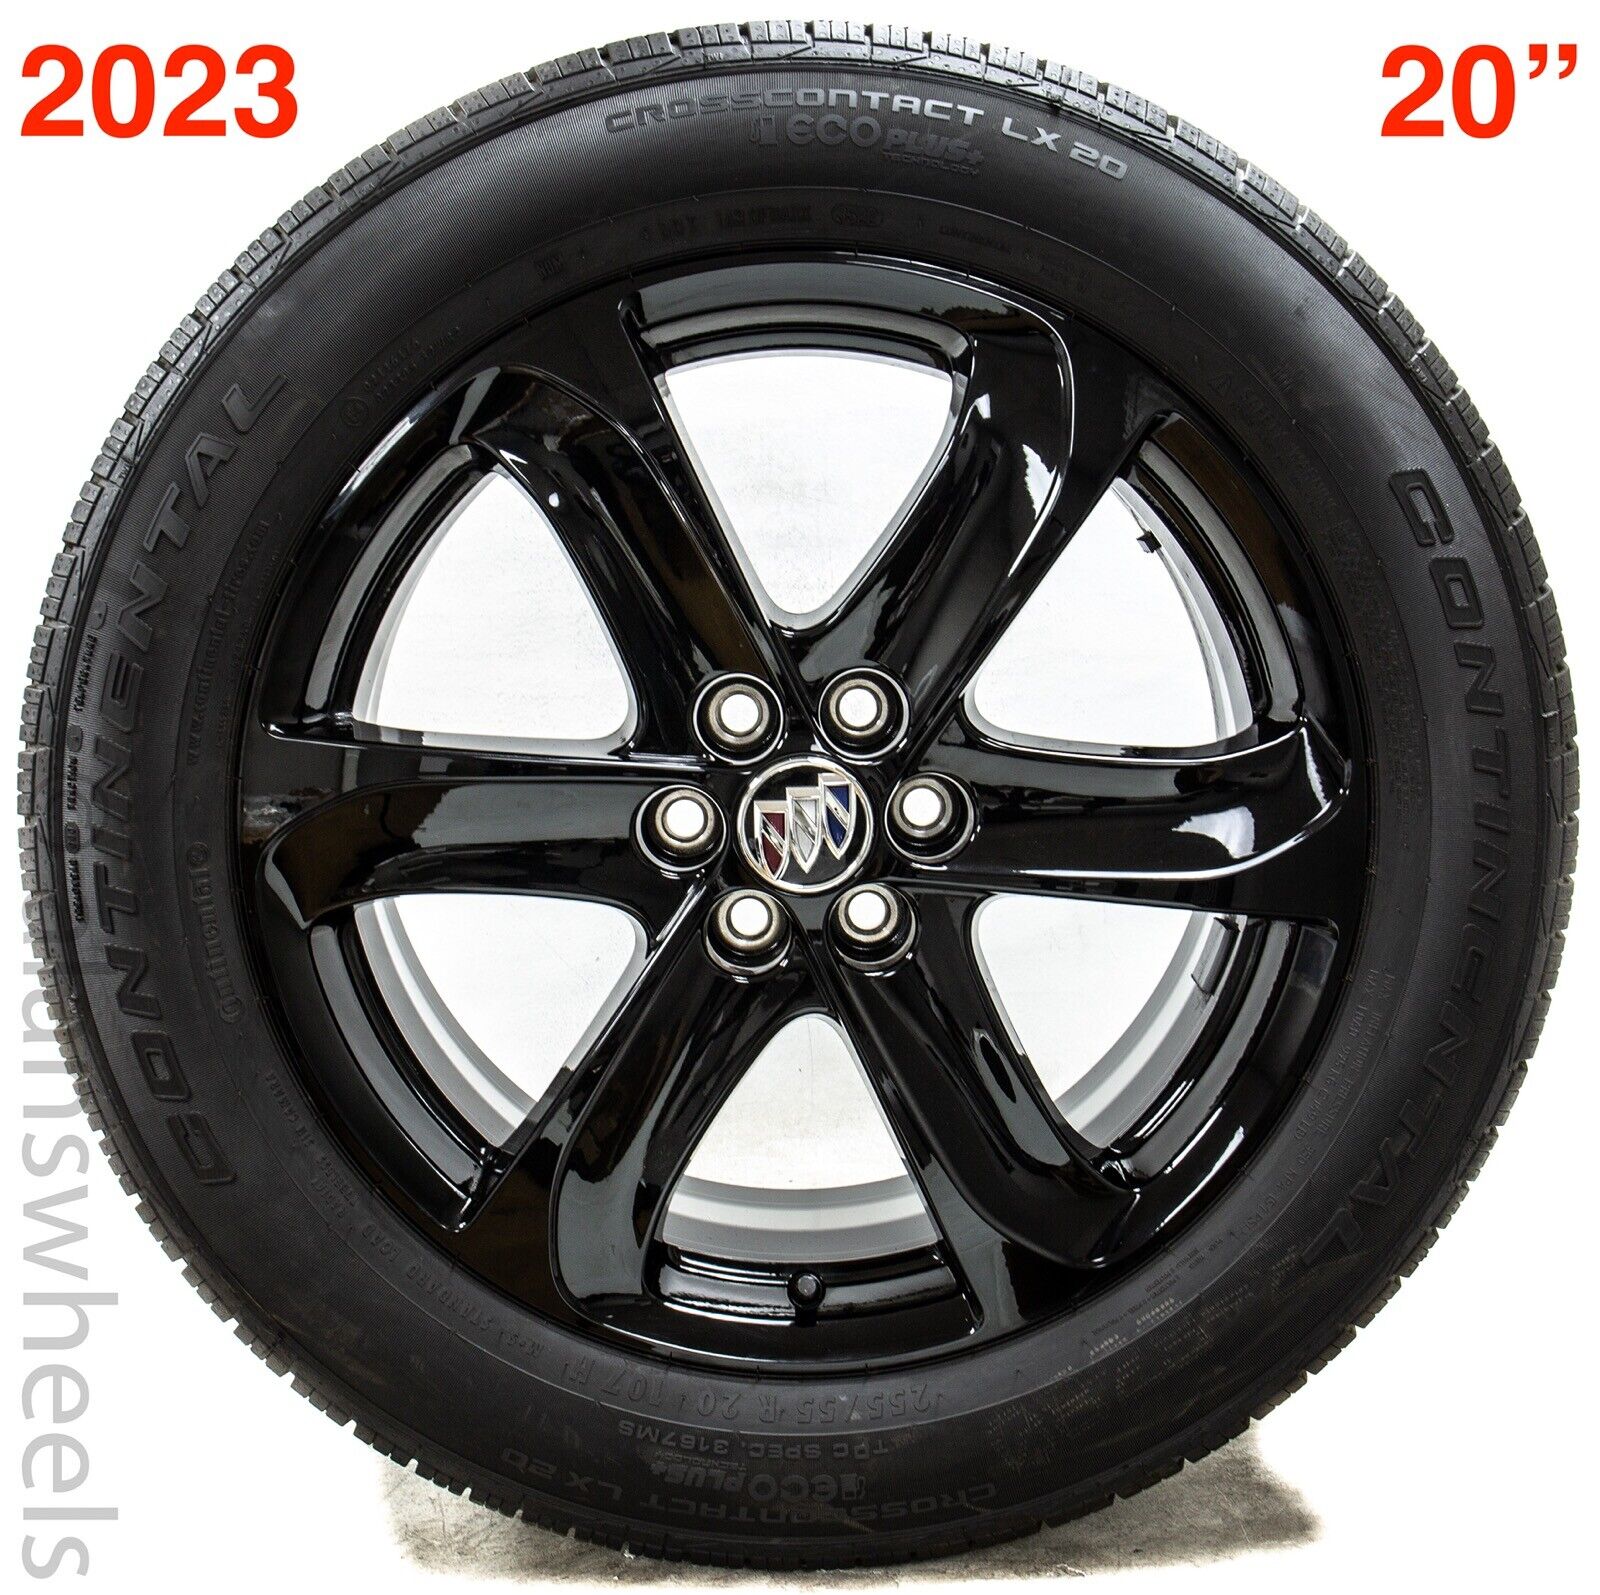 4 2023 Buick Enclave 20” Factory OEM Gloss Black Wheels Rims Continental Tires